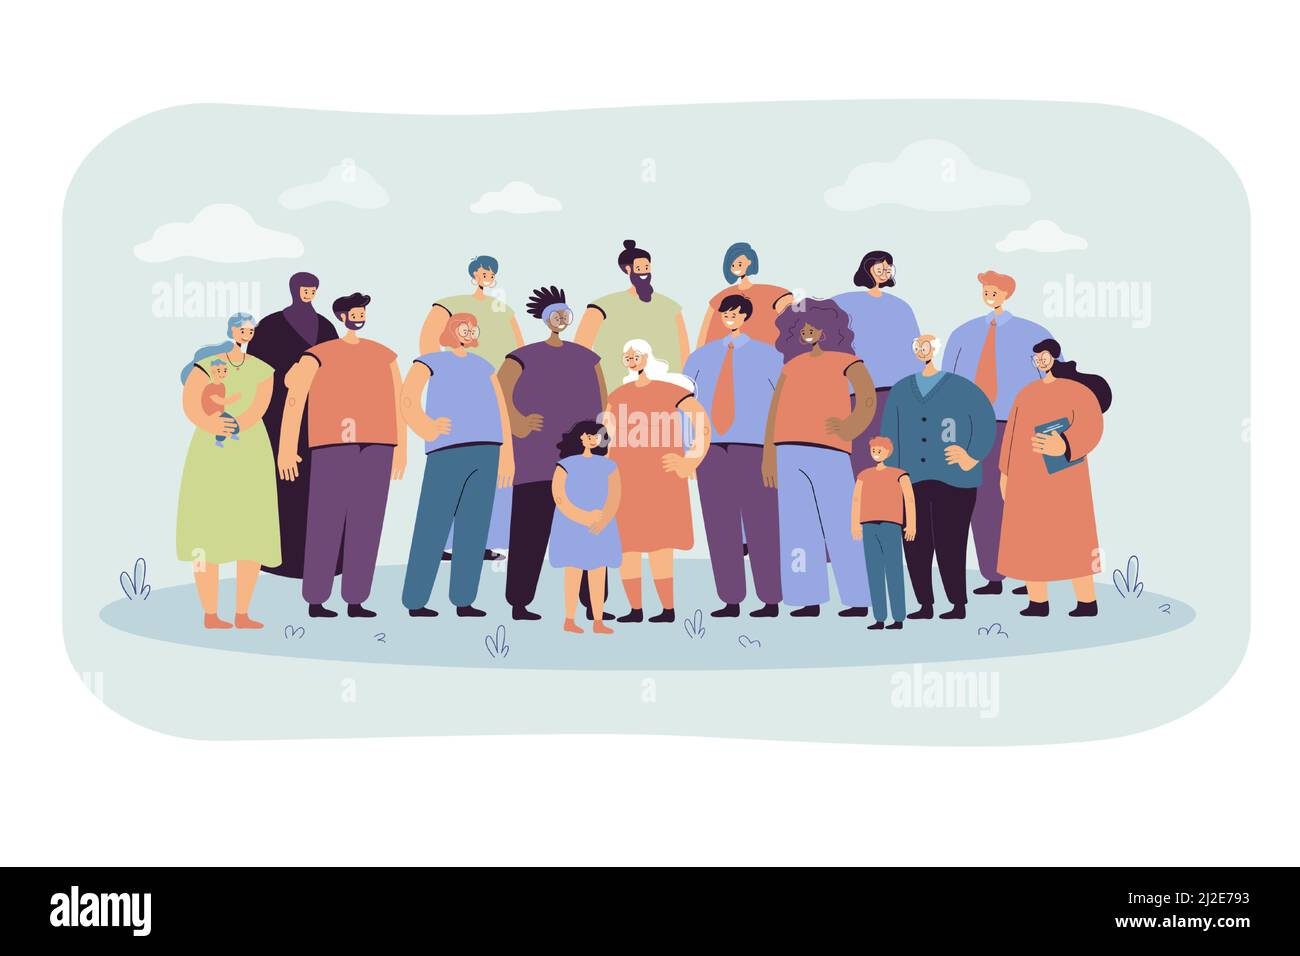 Multinational crowd of people standing together flat vector illustration. Portrait of cartoon diverse young and old men, women and kids. Multicultural Stock Vector